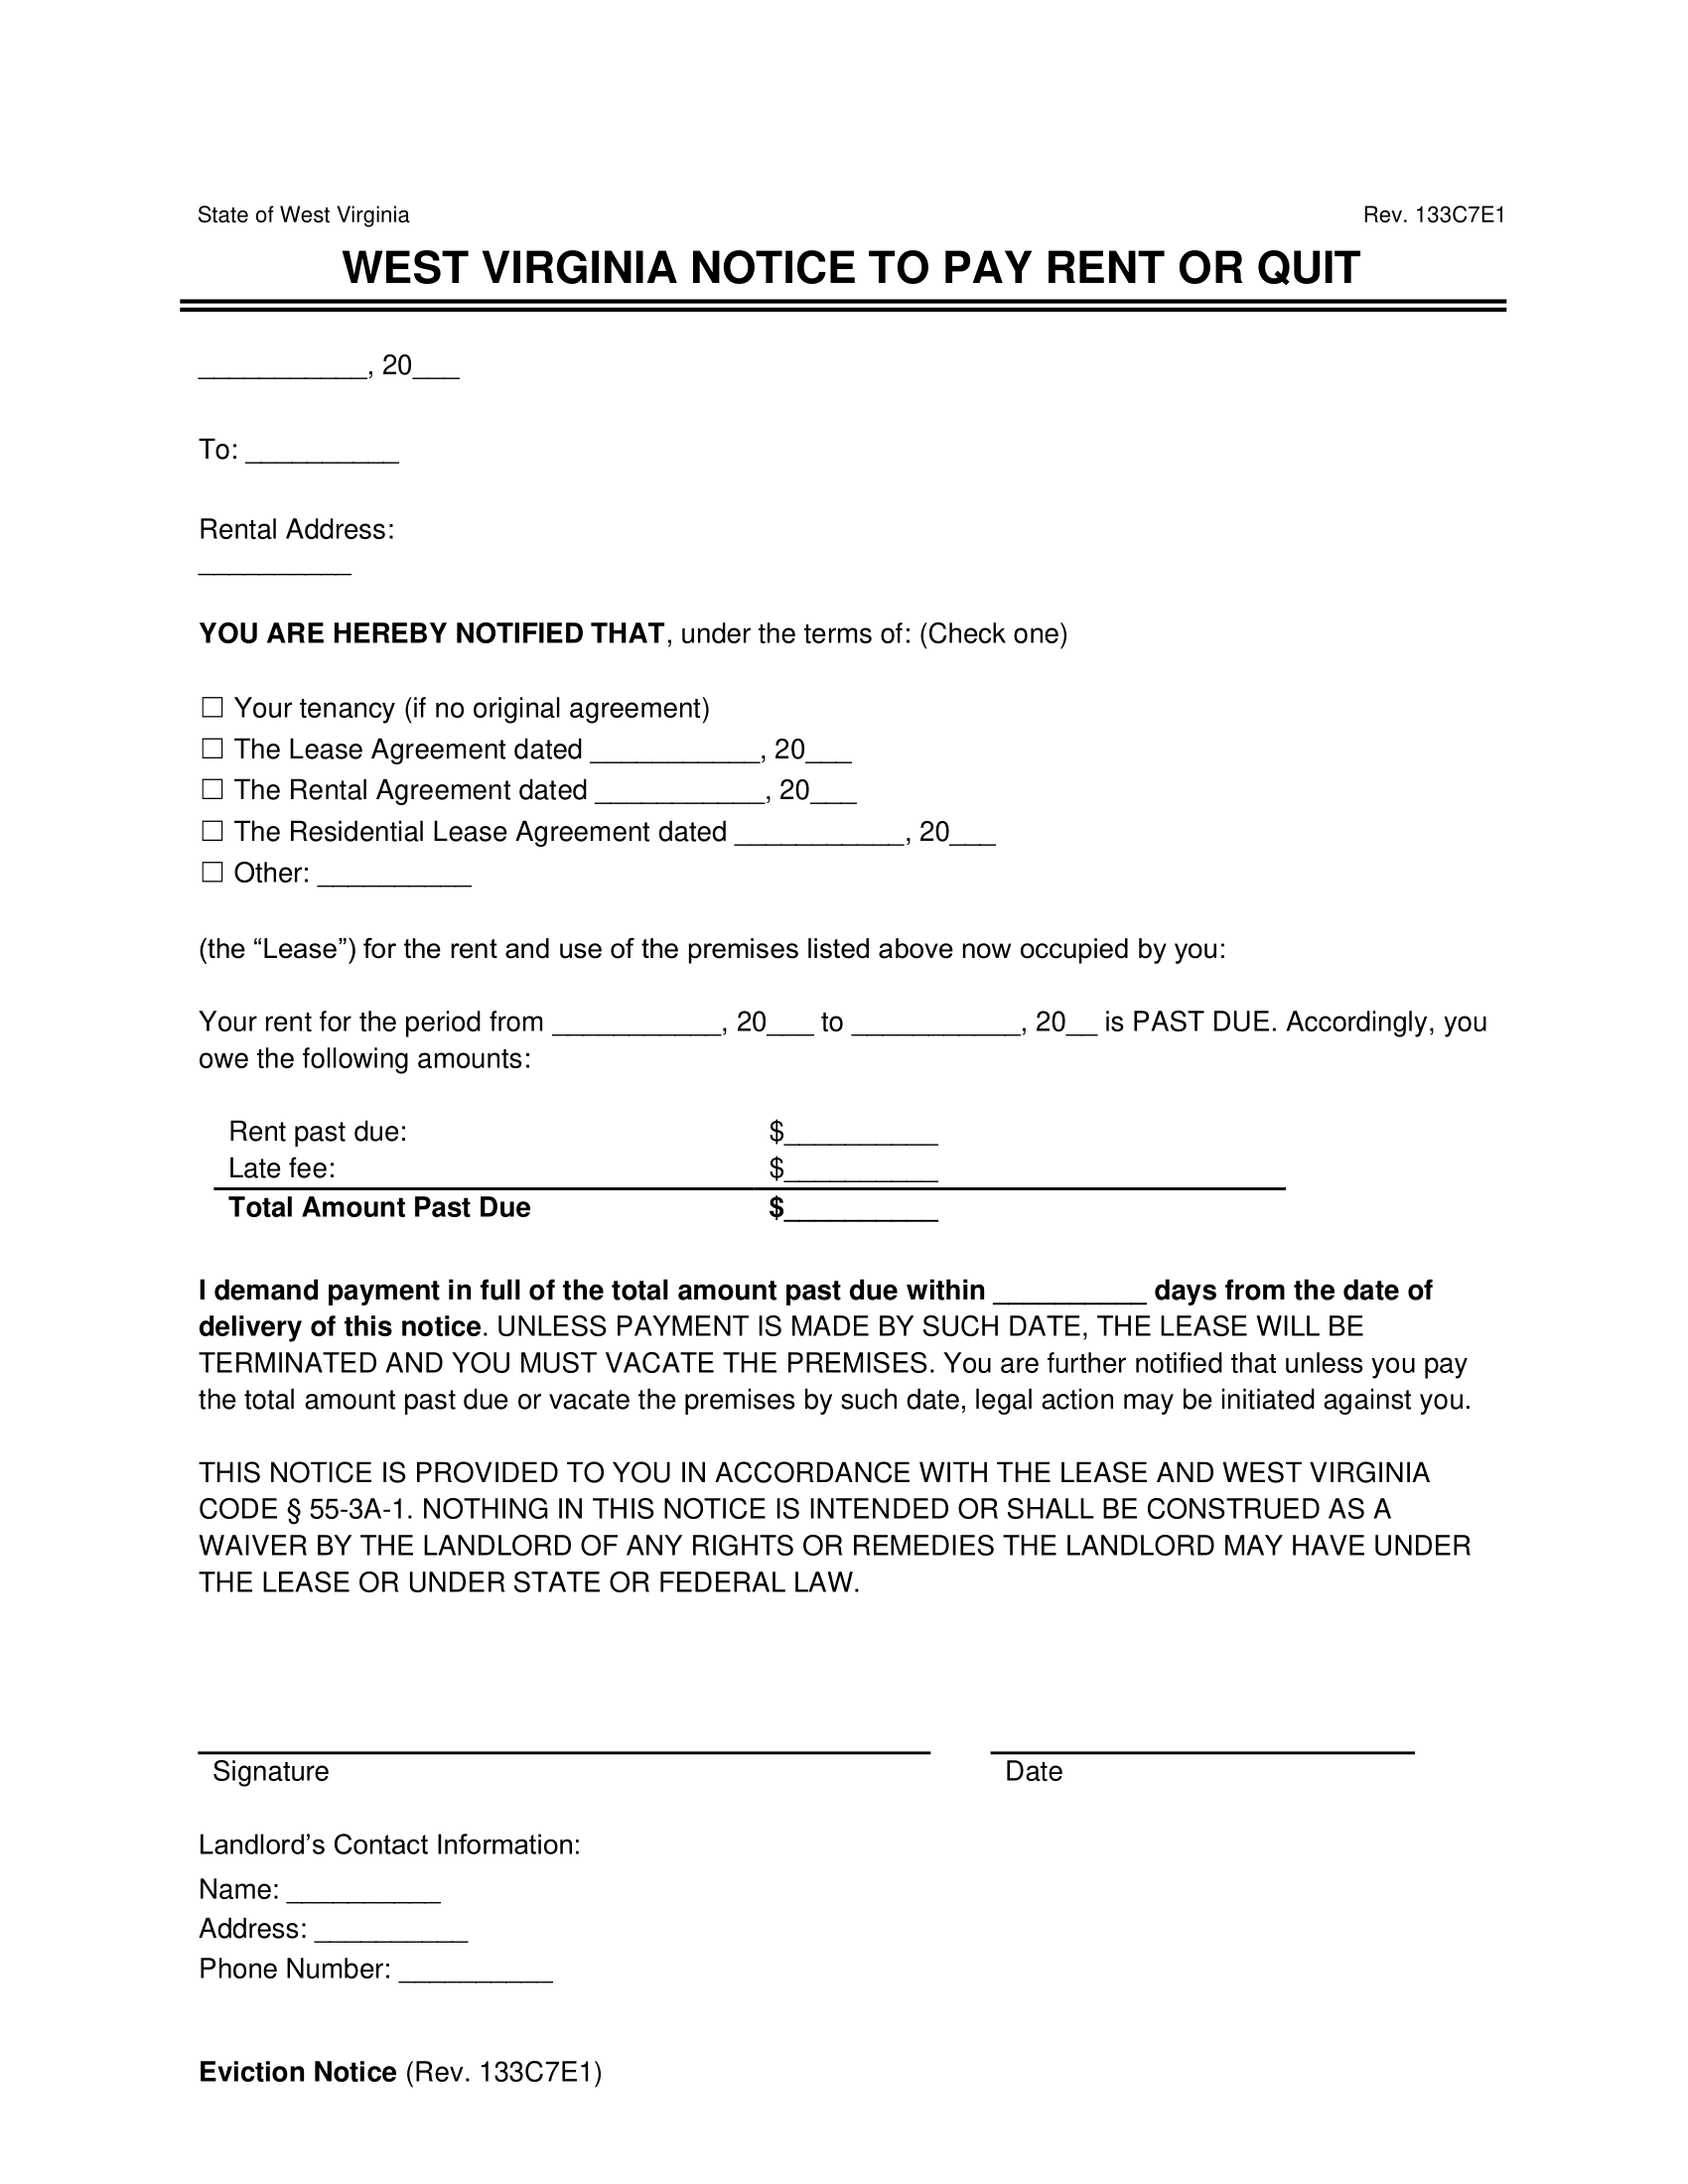 West Virginia Eviction Notice to Quit (Non-Payment of Rent)